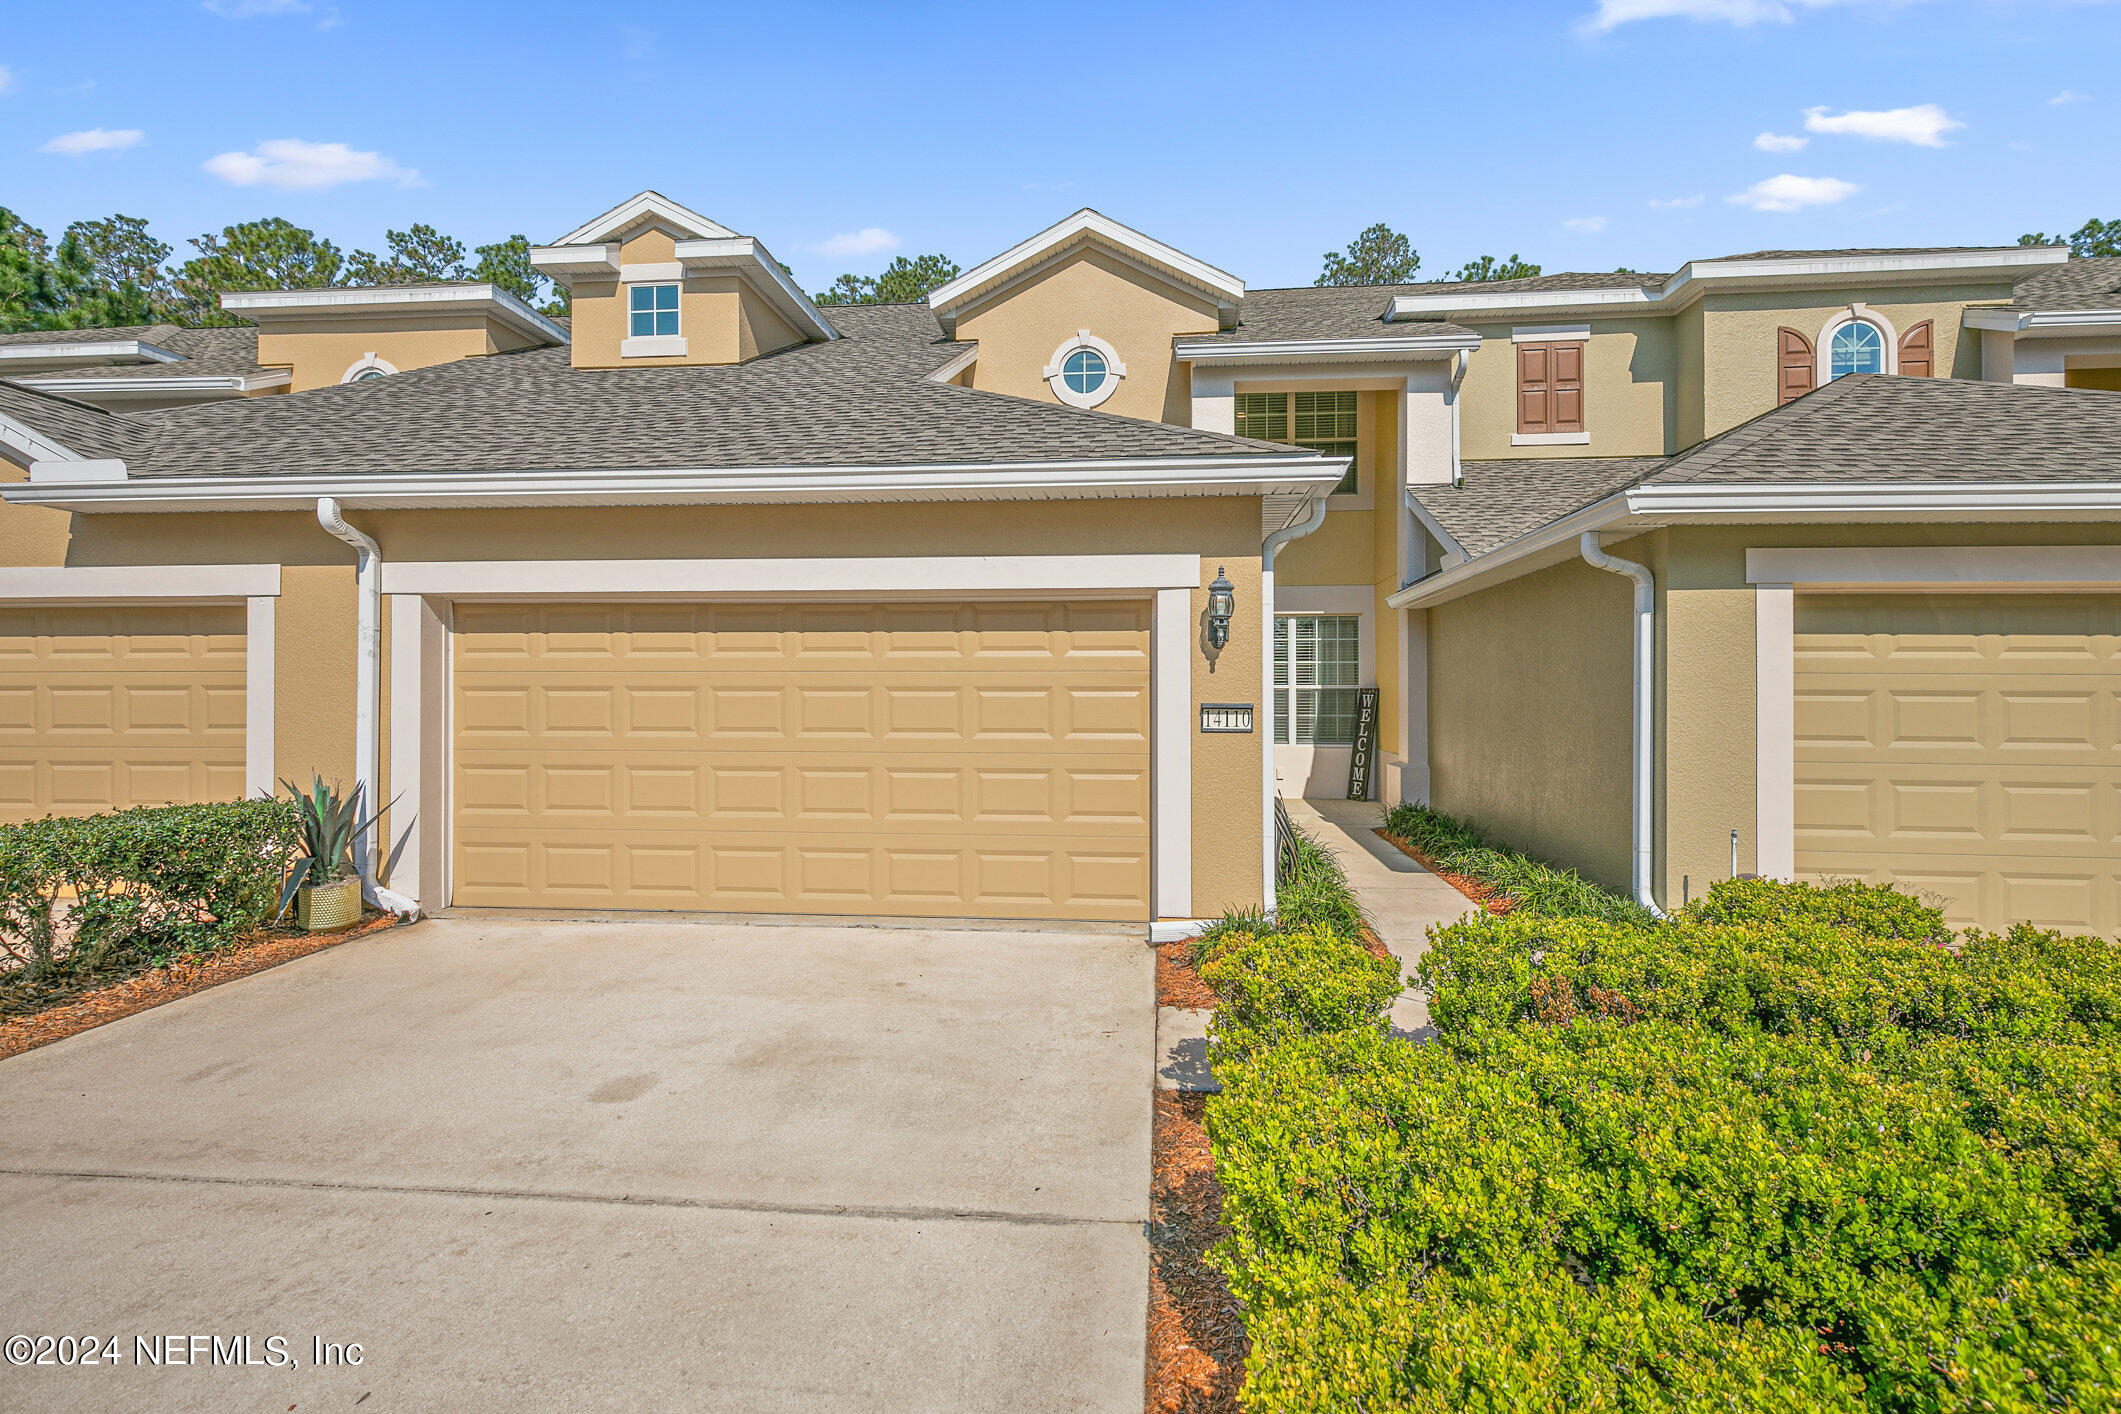 View Jacksonville, FL 32258 townhome